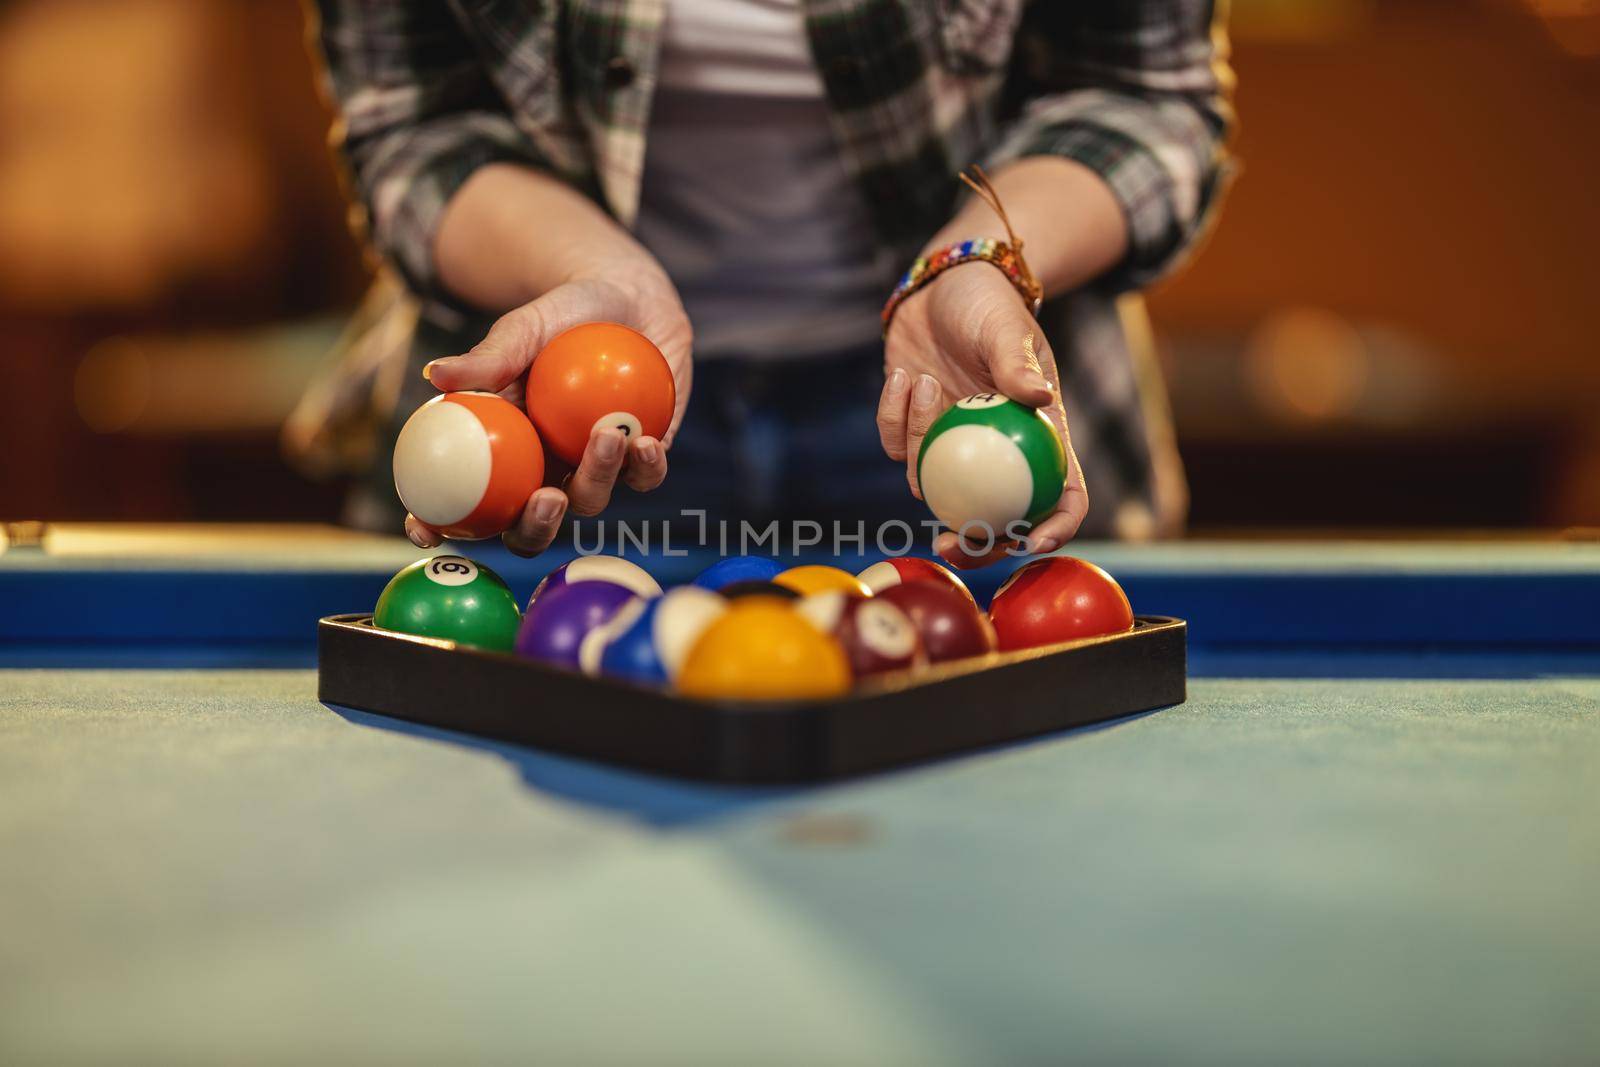 Close-up of a young woman's hands places billiard balls on a pool table to play.